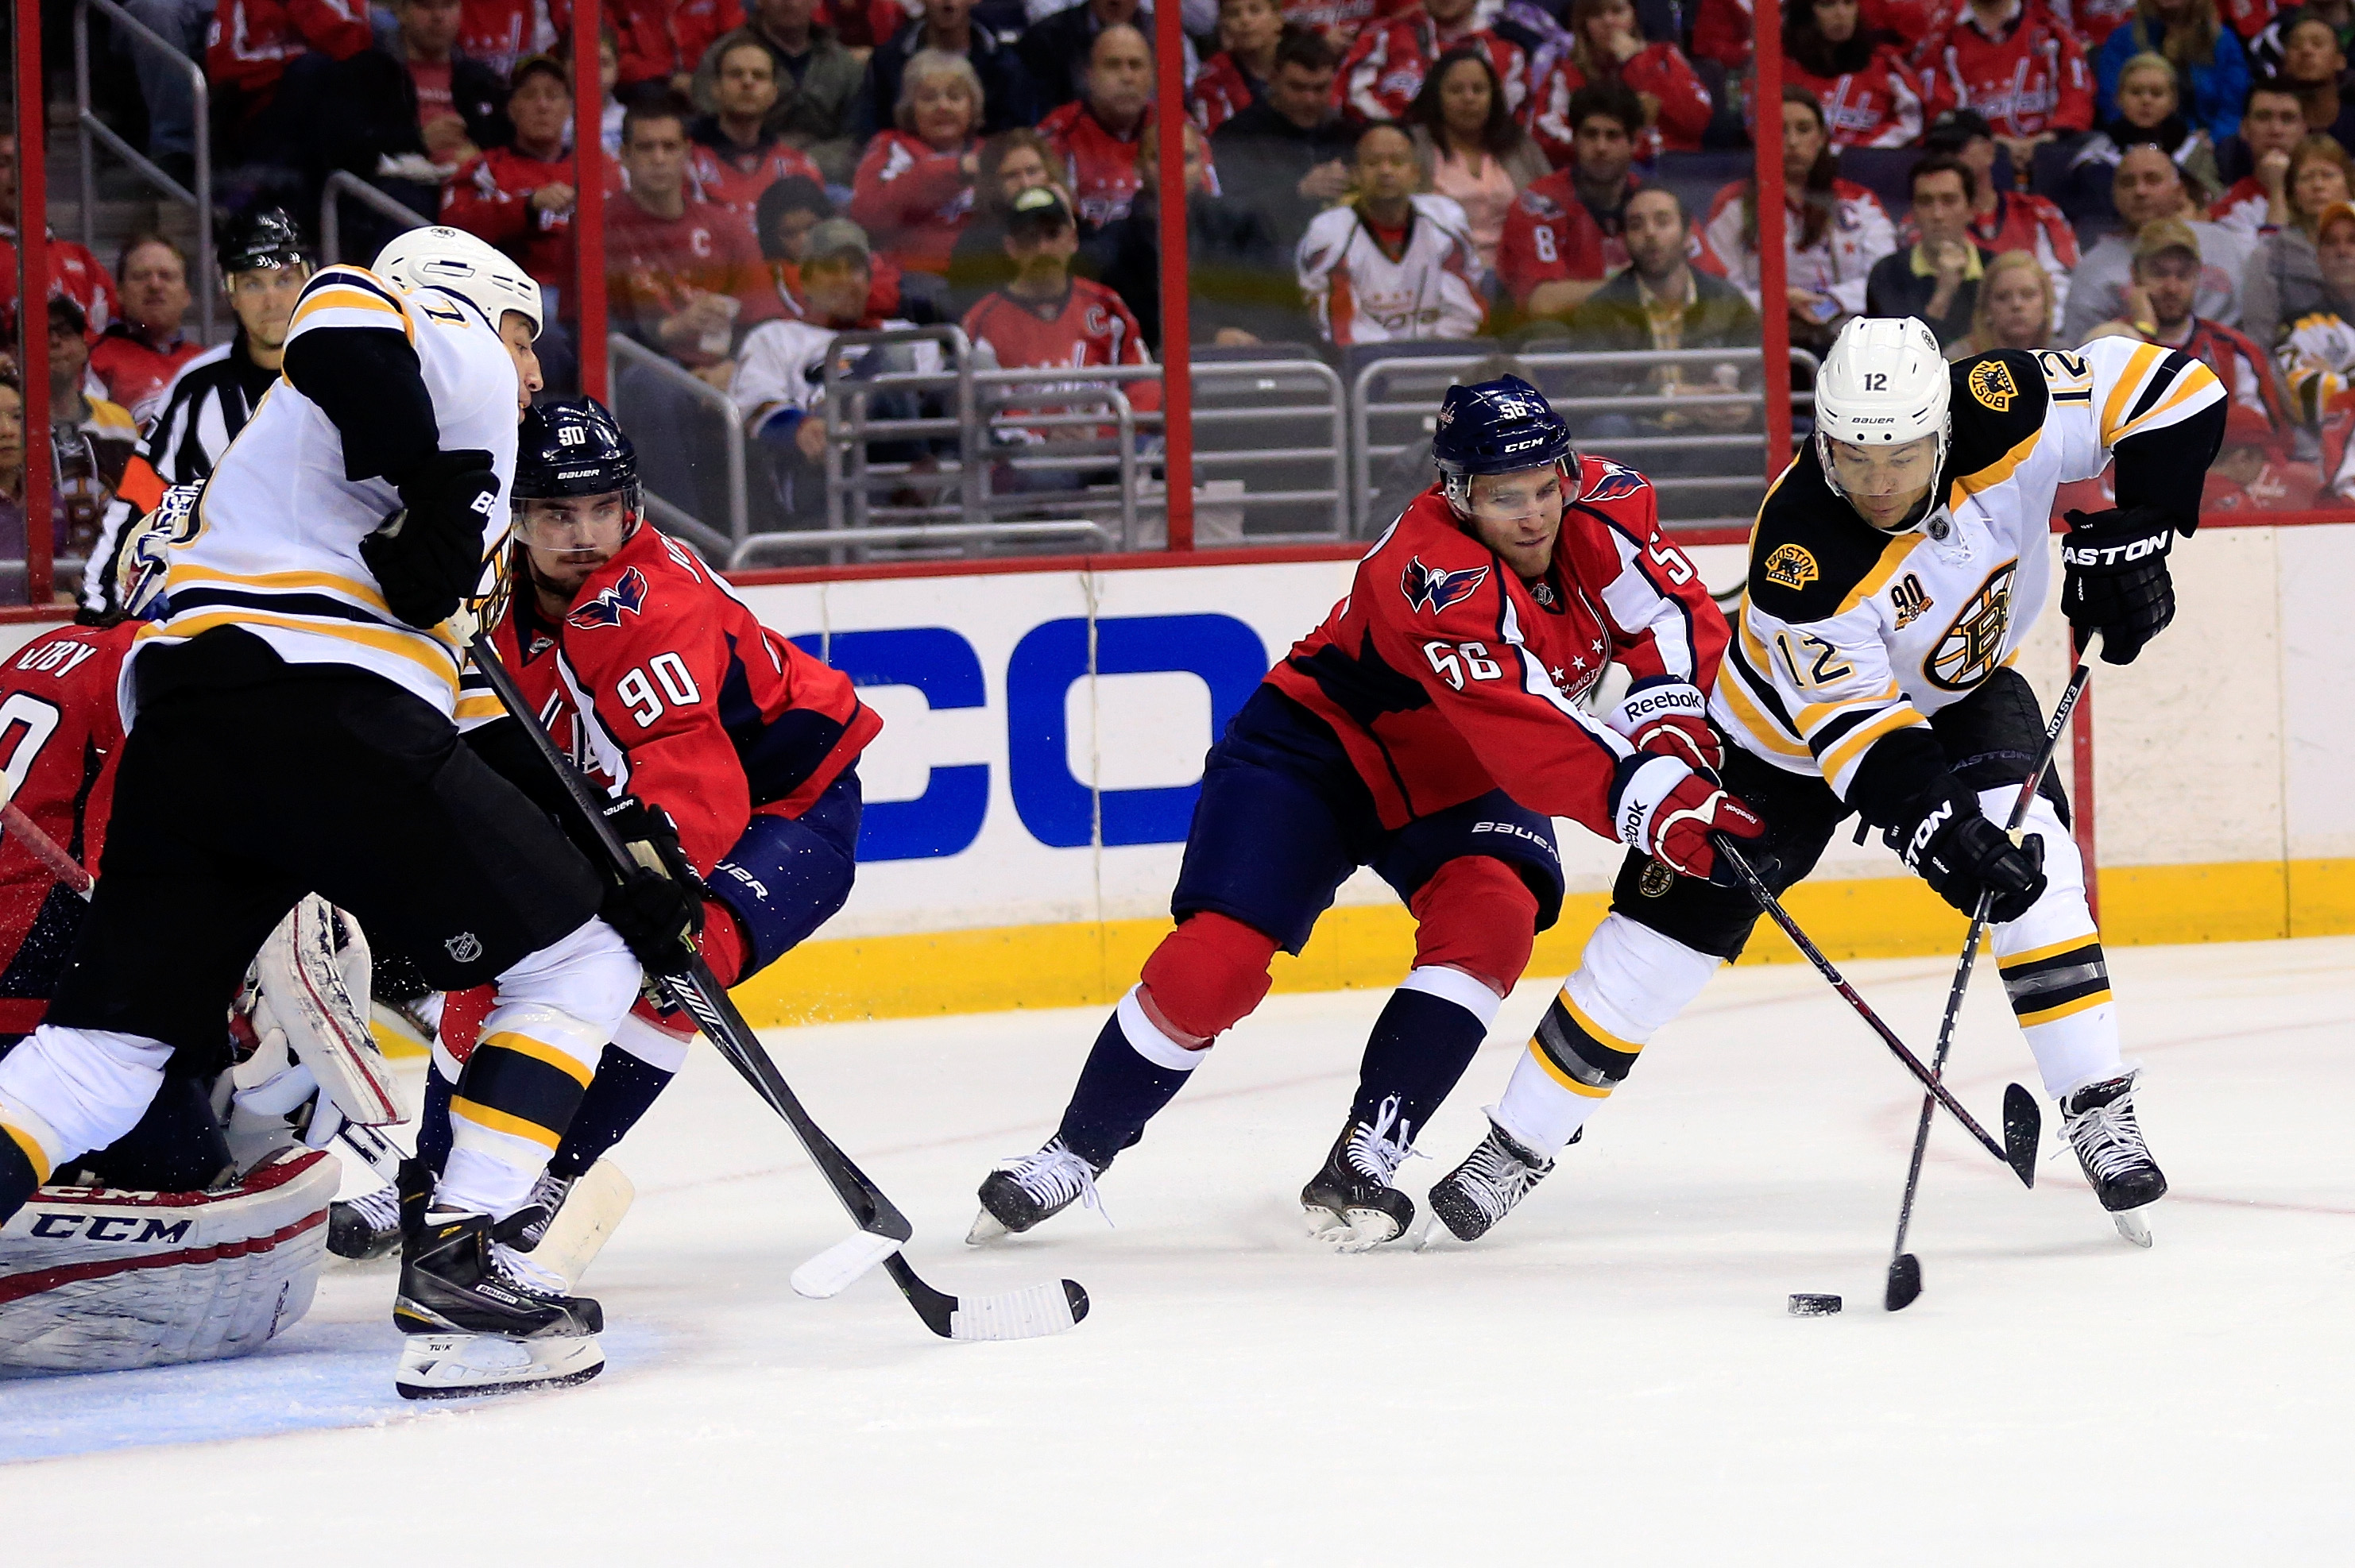 How to Watch Bruins vs. Capitals Live Stream Online